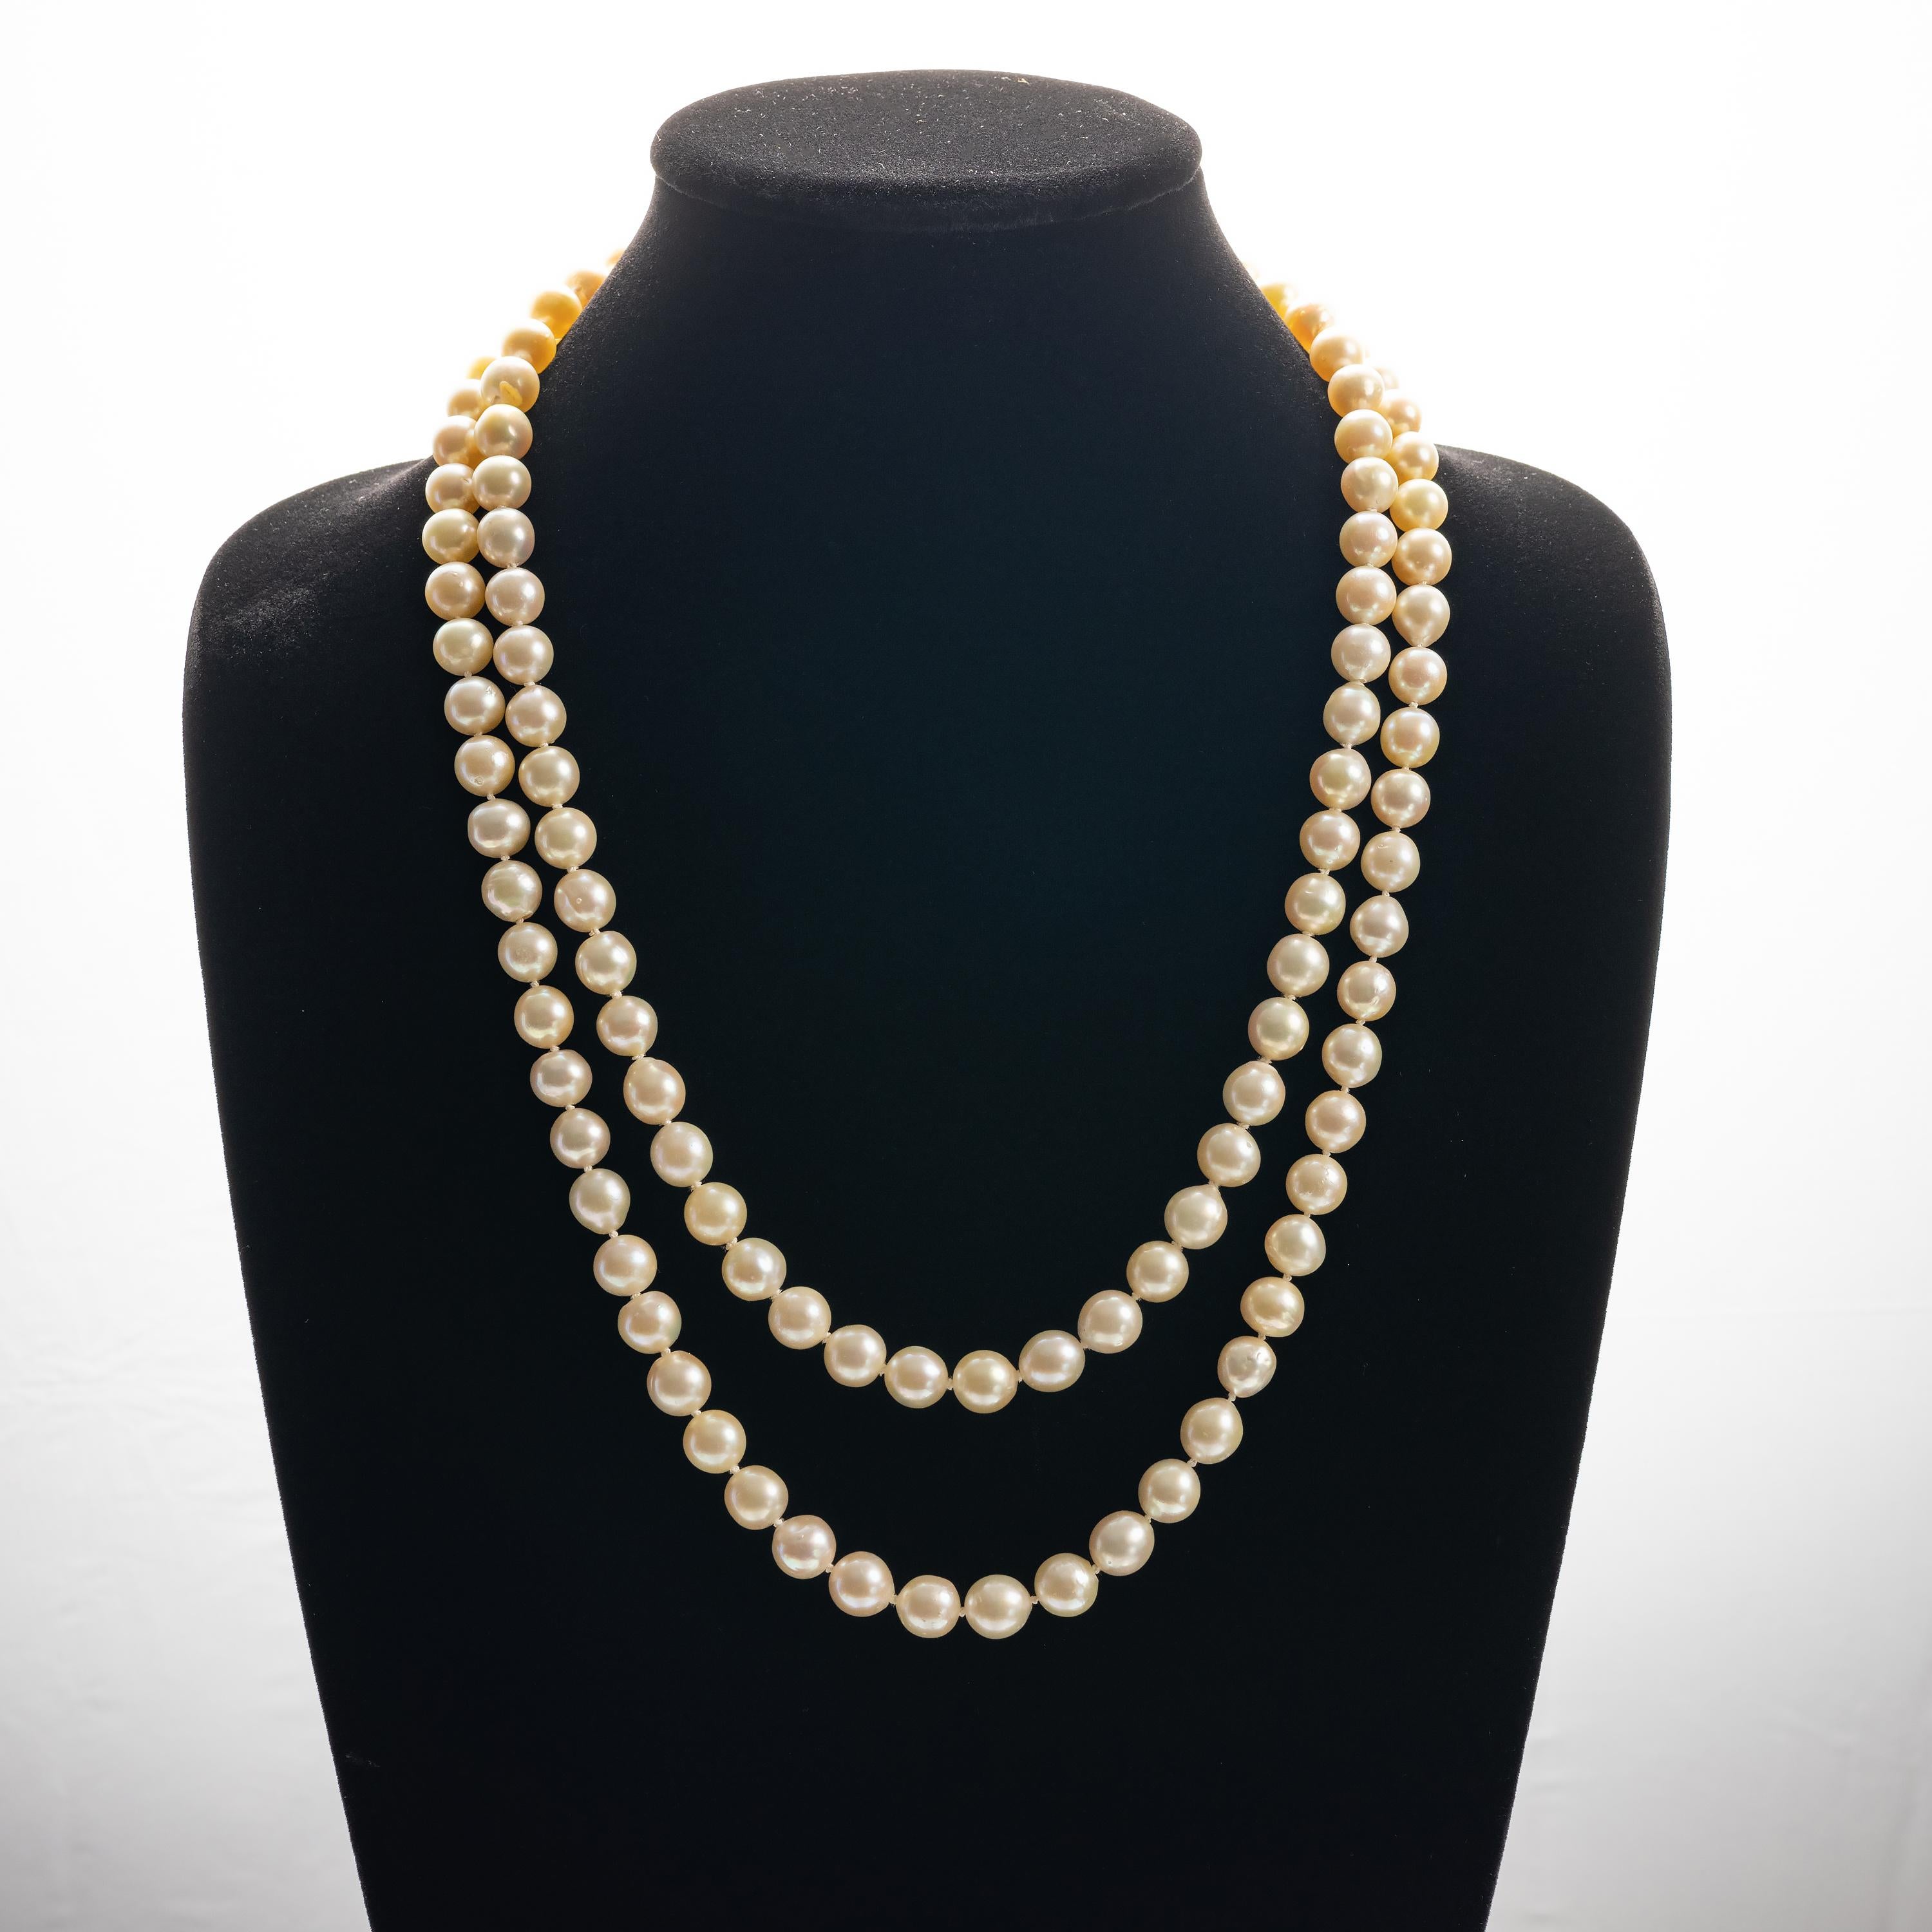 Women's or Men's Akoya Pearl Double Strand Necklace